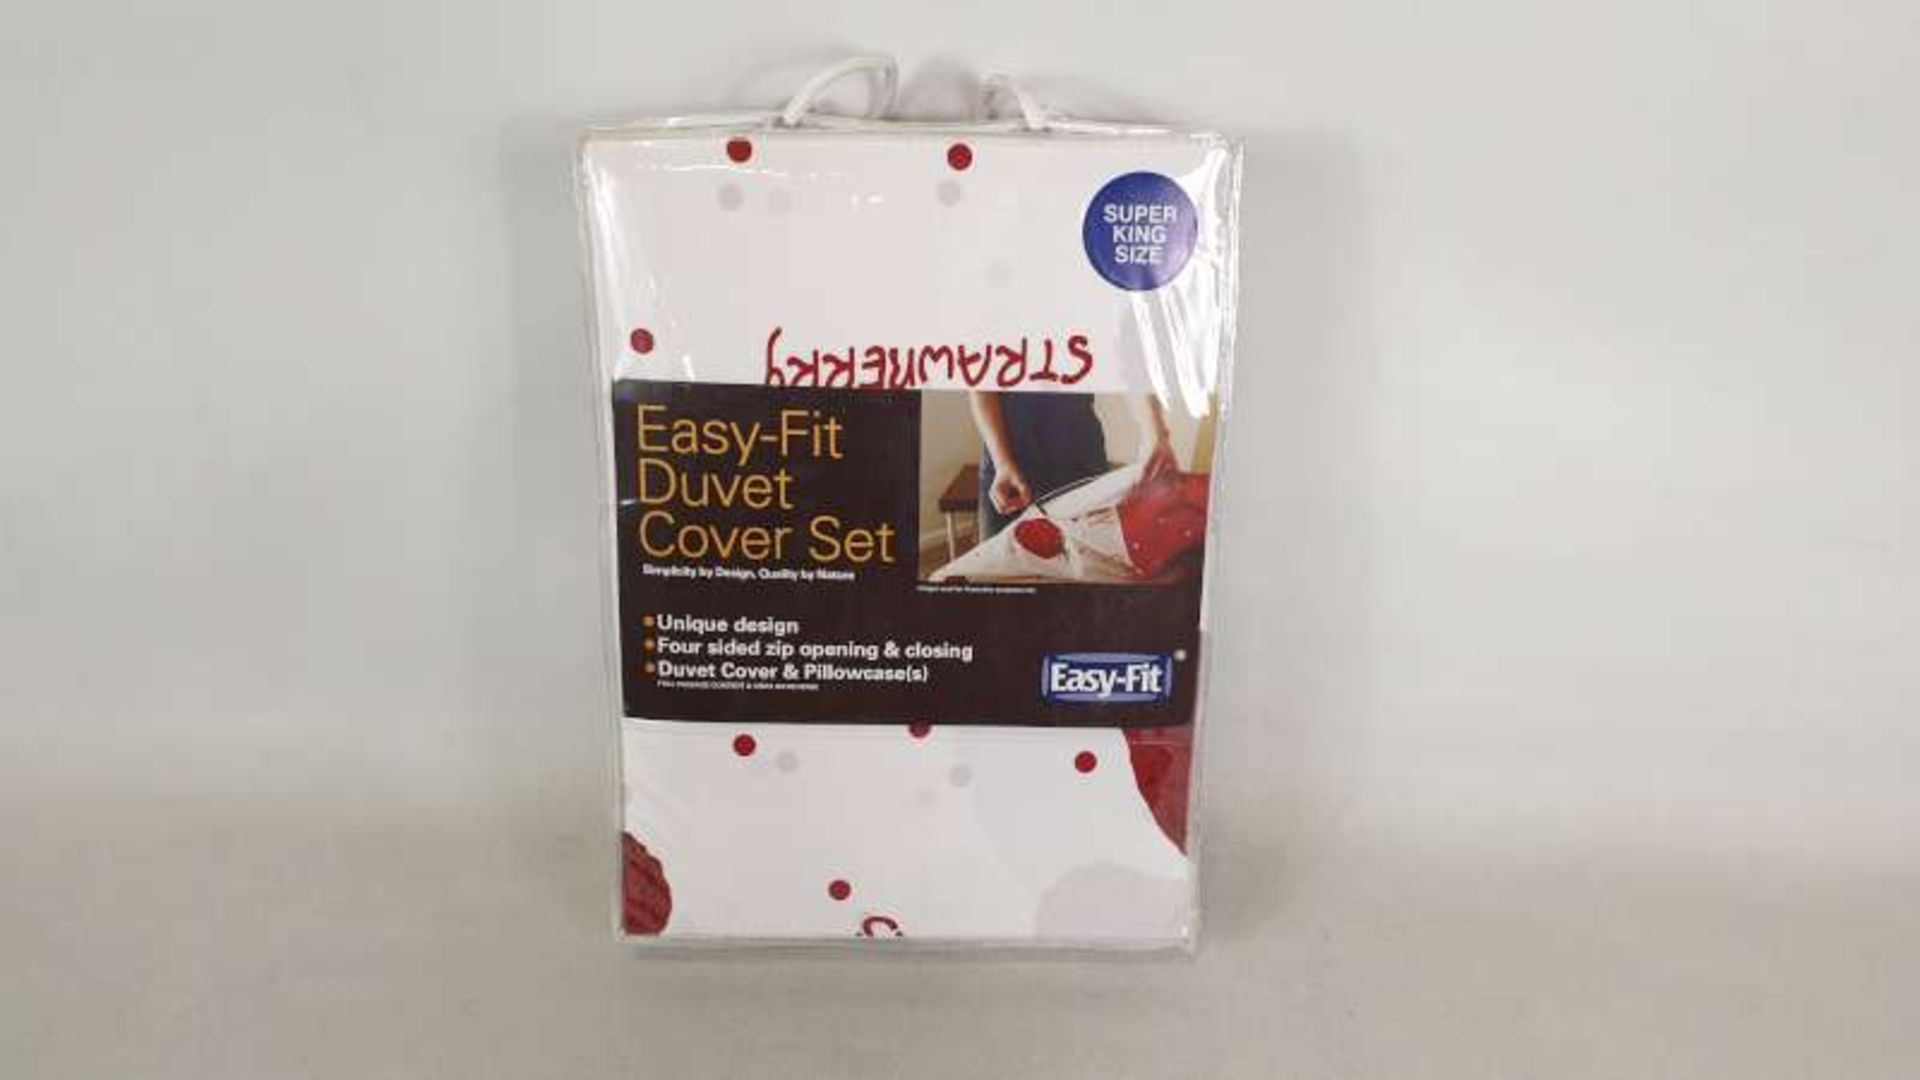 6 X BRAND NEW SUPER KING SIZE DUVET COVER SETS WITH STRAWBERRY DETAIL